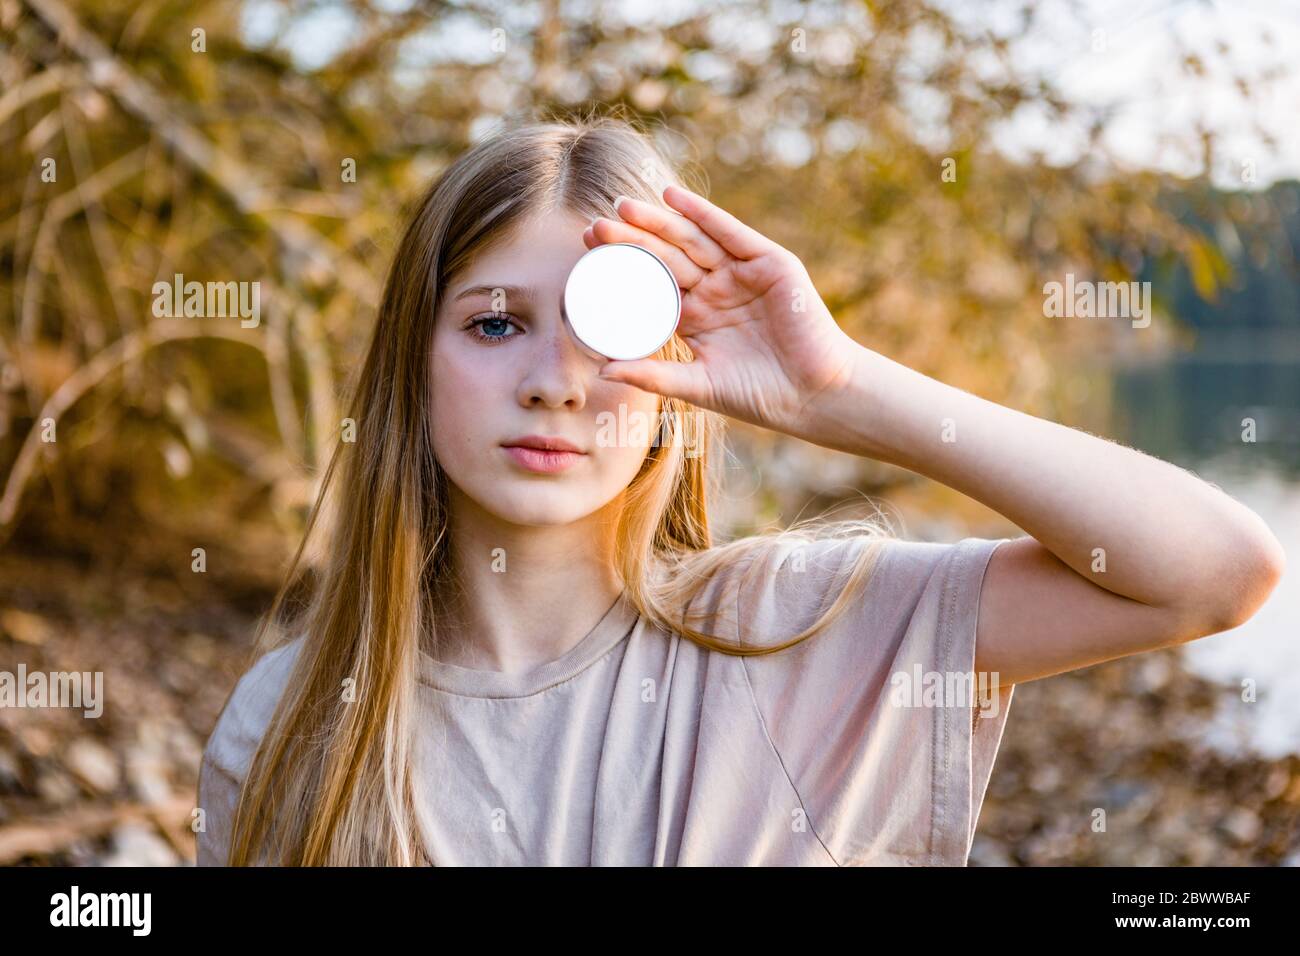 Portrait of girl holding mirror in front of eye during sunset Stock Photo